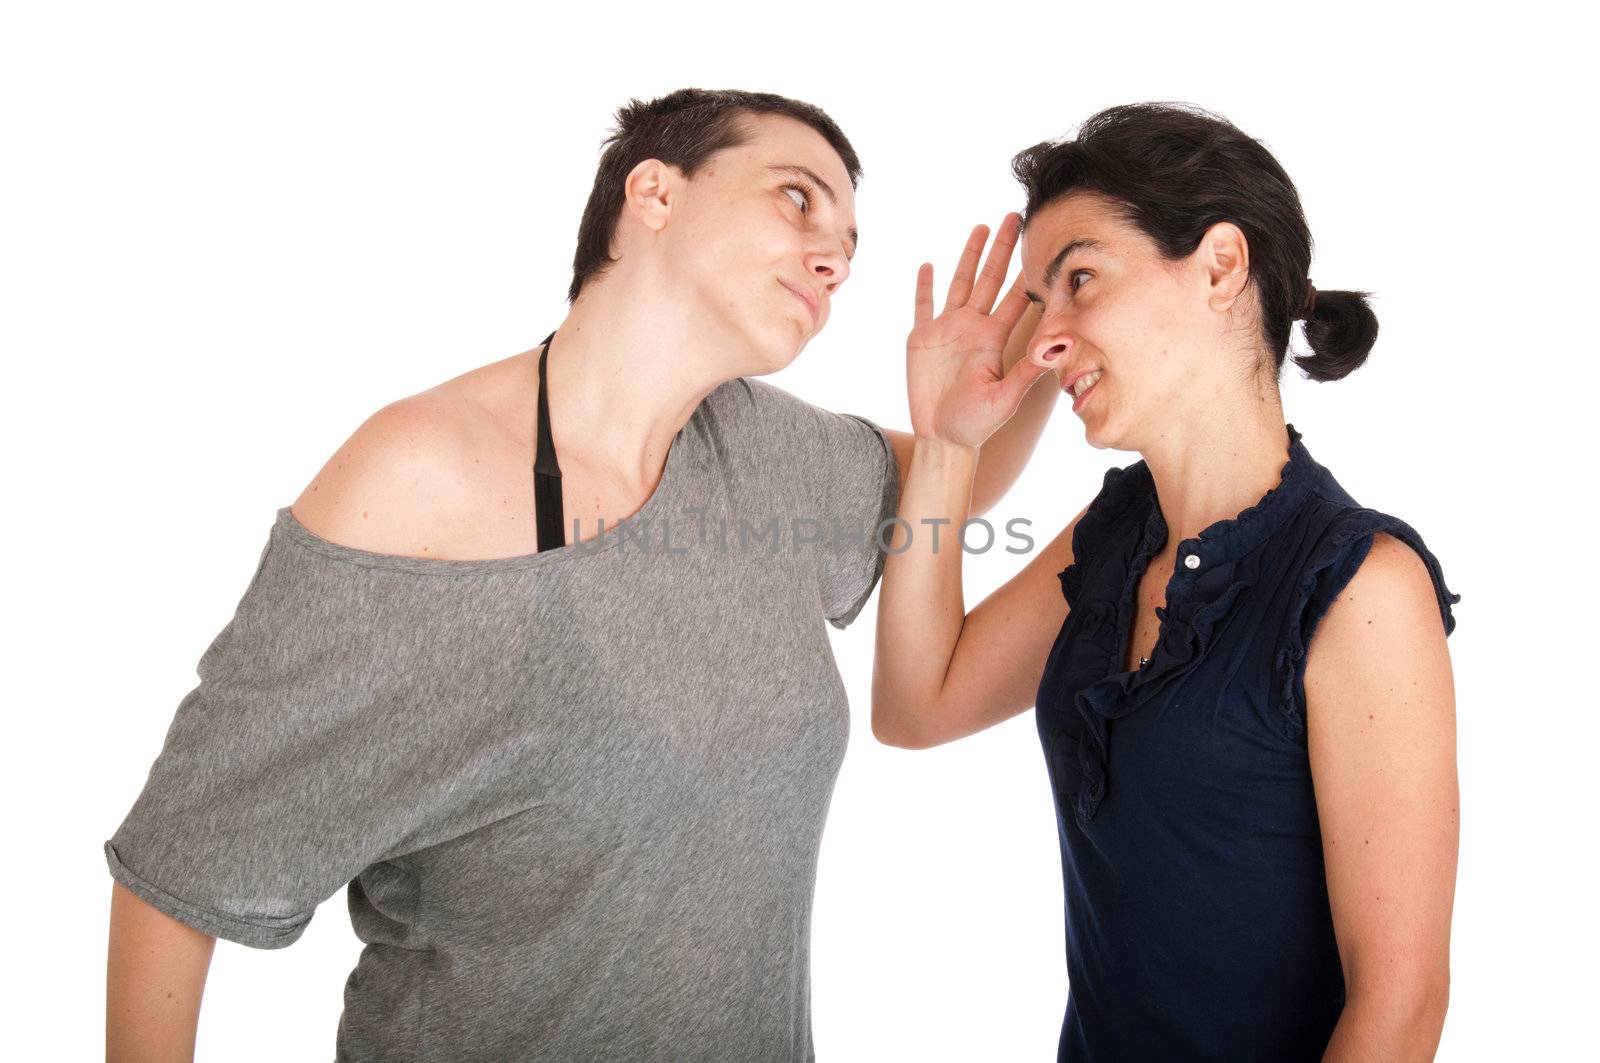 angry sisters in their 30s arguing with each other, isolated on white background